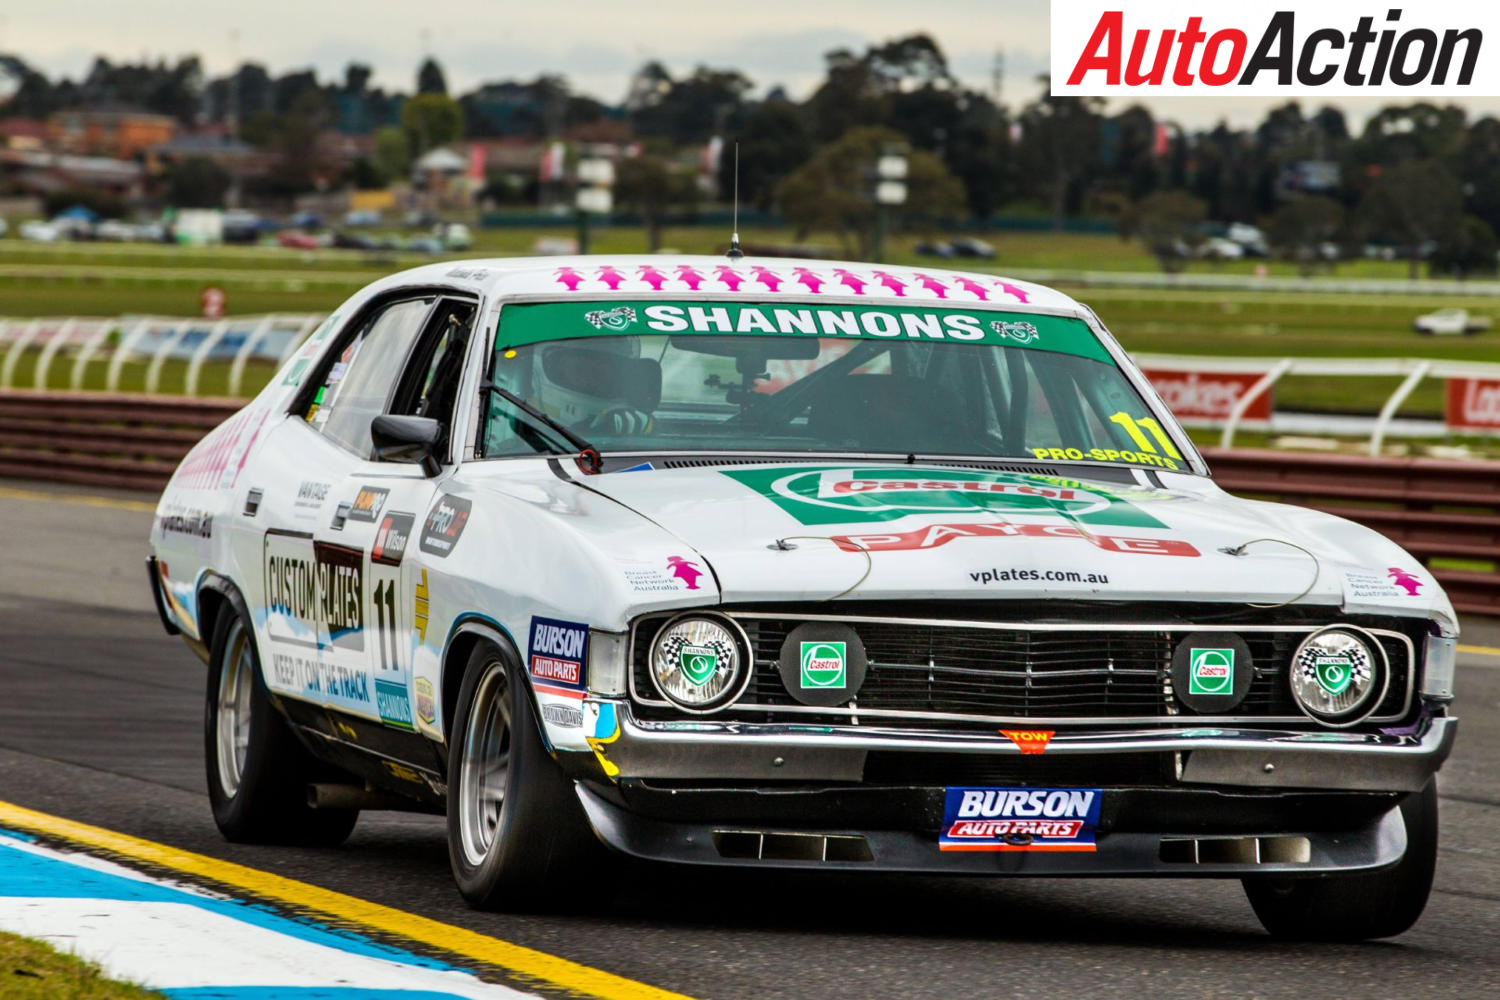 NEW INITIATIVES FOR TOURING CAR MASTERS IN 2019 Auto Action